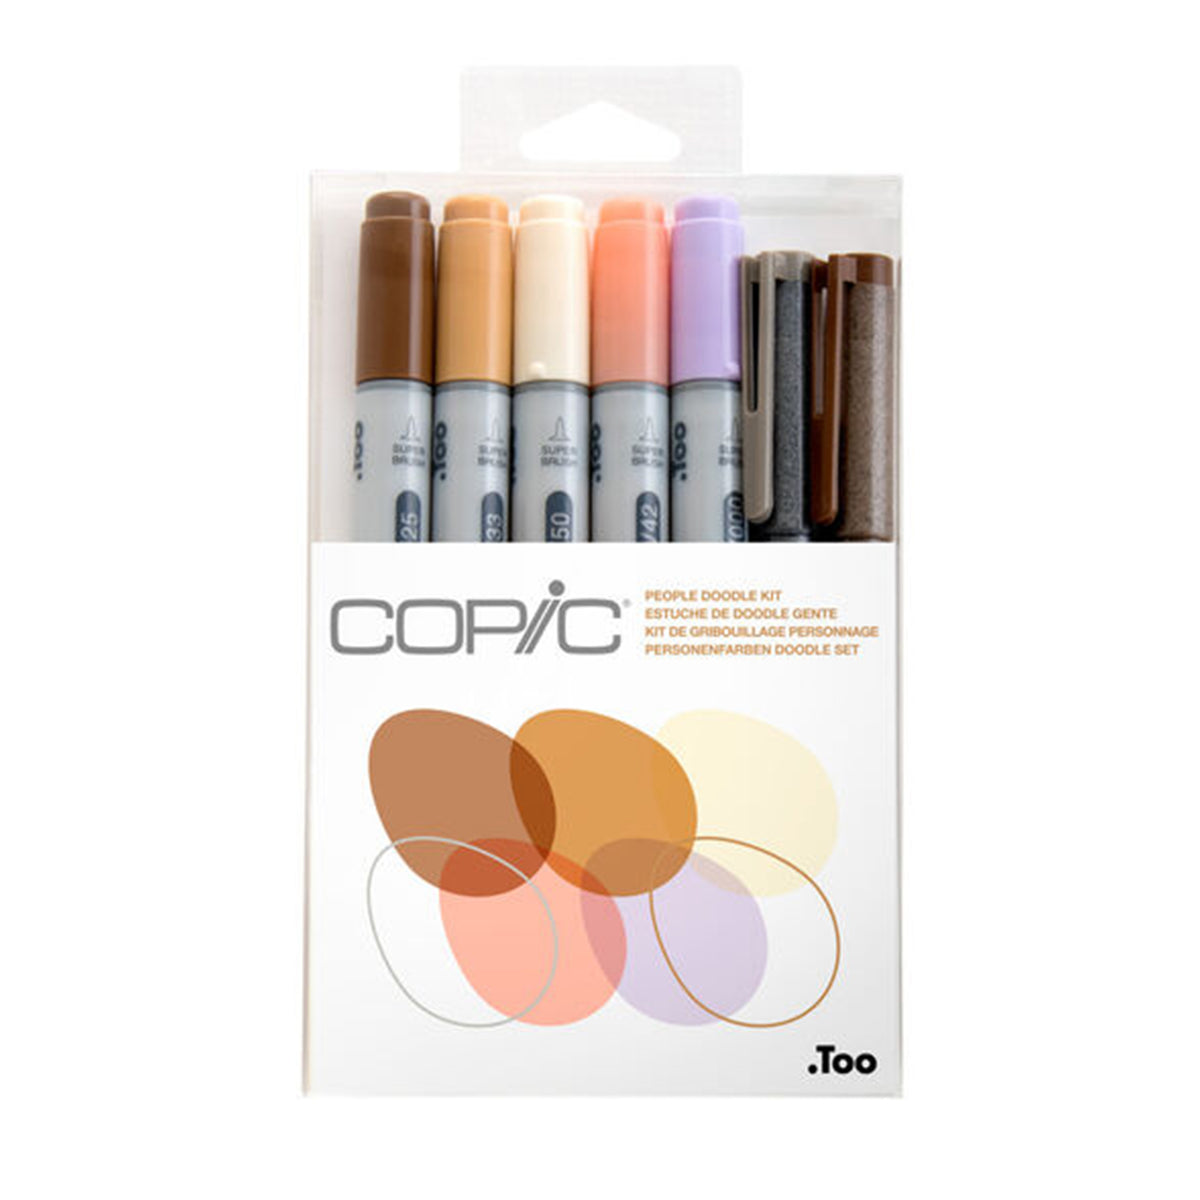 Copic : Ciao Marker : Skin Tones : Set of 12